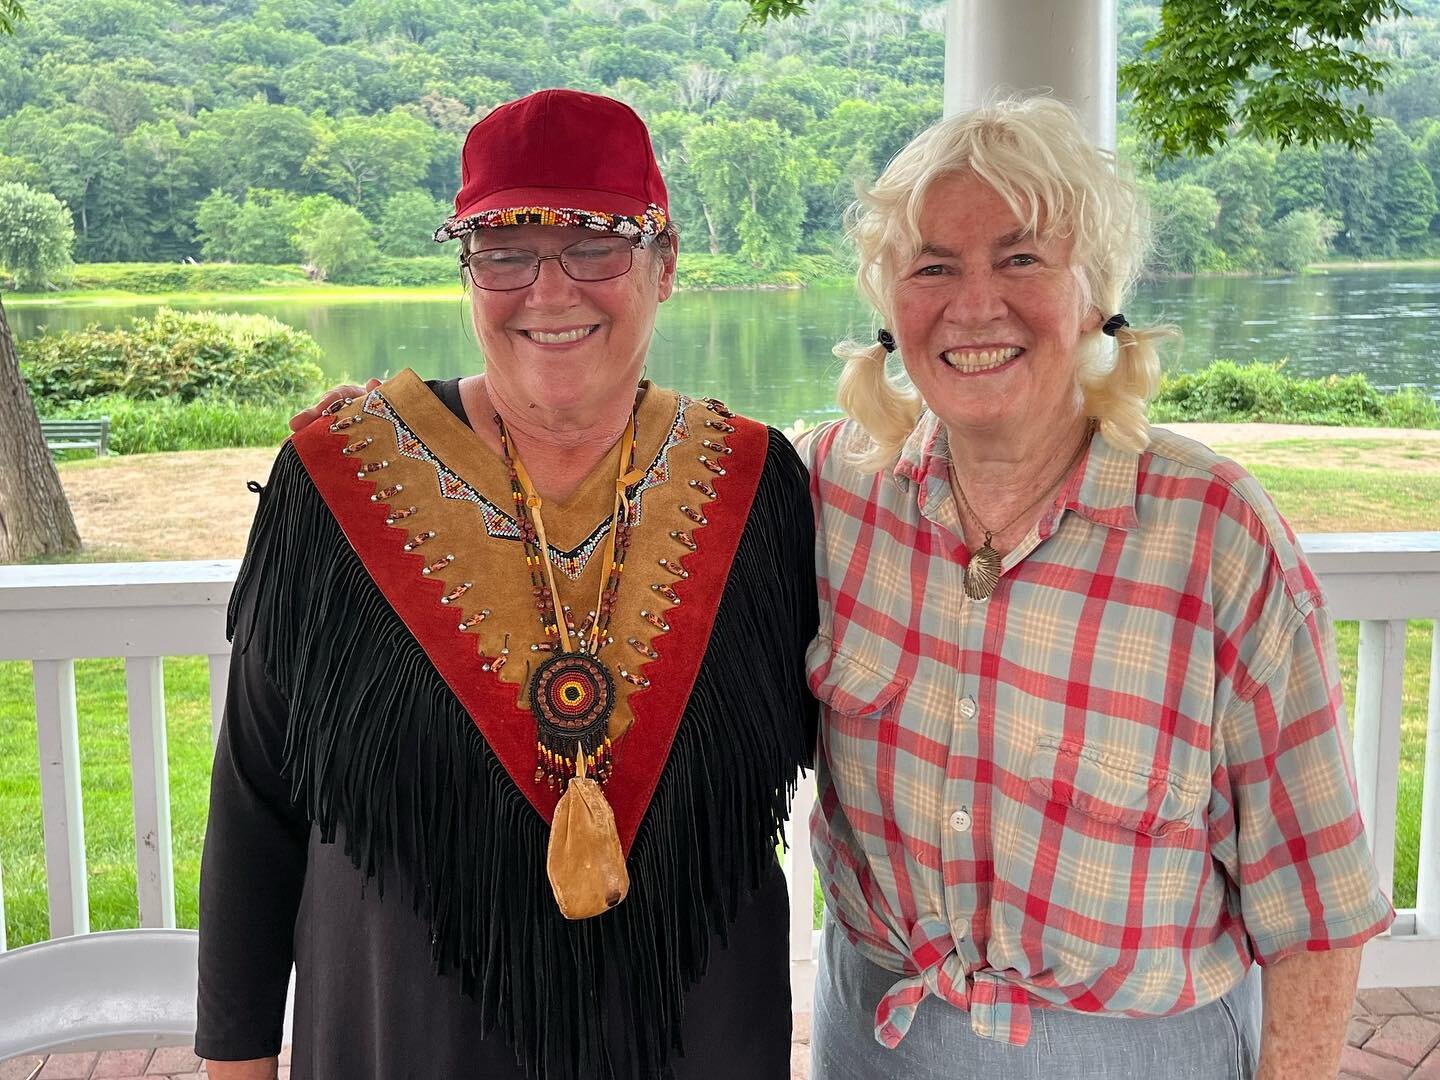 With Shelley DePaul, Secretary of the Lenape Nation, when I was among those who signed the Treaty of Renewed Friendship on bank of Delaware River during the Lenape river journey held every four years, when Lenapes and allie&rsquo;s canoe from the Del